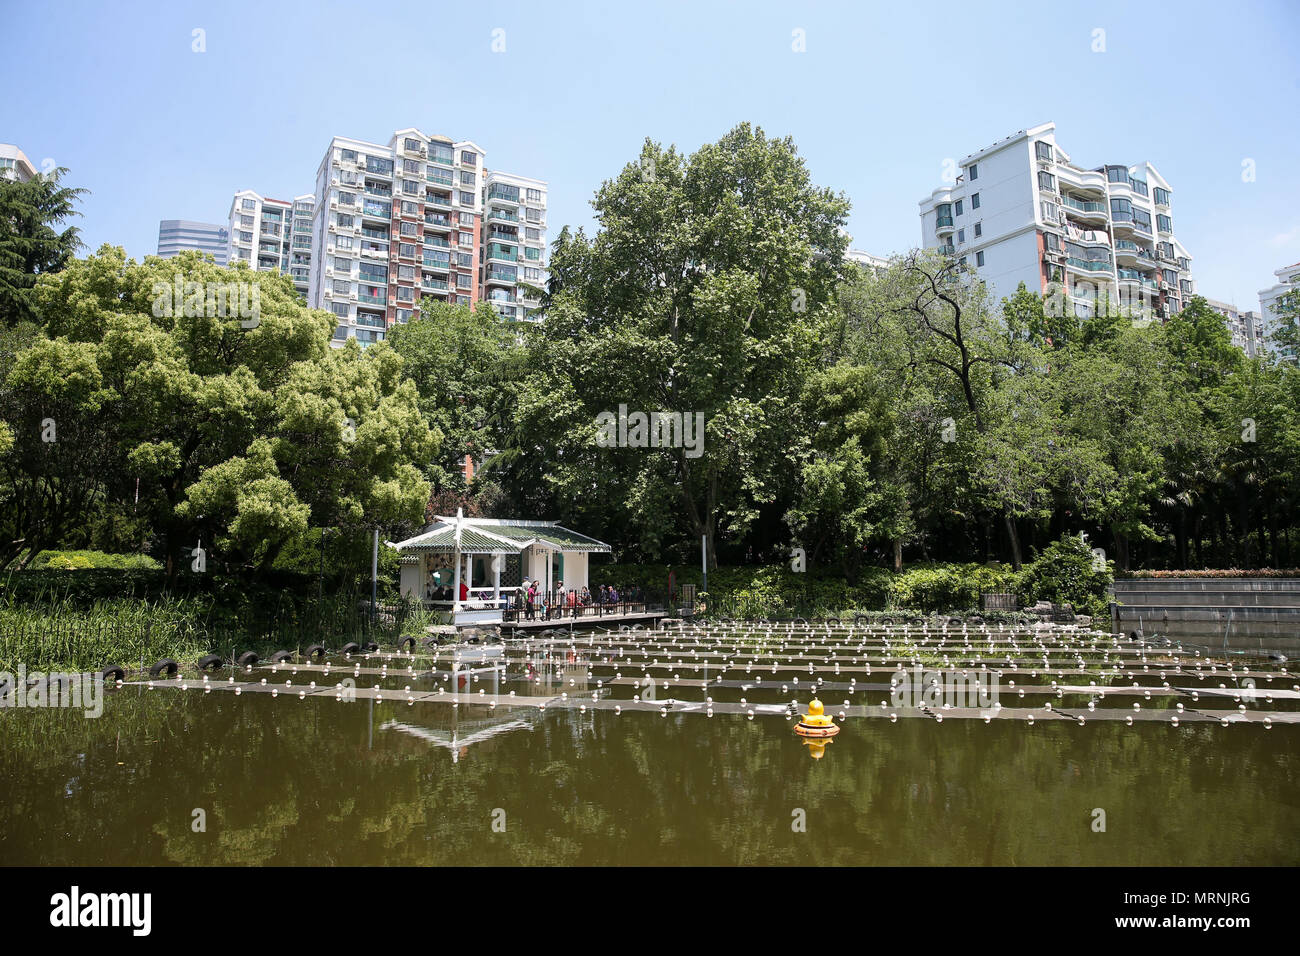 Shanghai. 25th Apr, 2018. A lake suffered excessive organics caused by the accumulation of fallen leaves is to be cleaned by being covered with the composite material at a park in east China's Shanghai, April 25, 2018. A new composite material developed by a group of Chinese researchers has proved highly effective in cleaning water contaminated by organics. Credit: Ding Ting/Xinhua/Alamy Live News Stock Photo